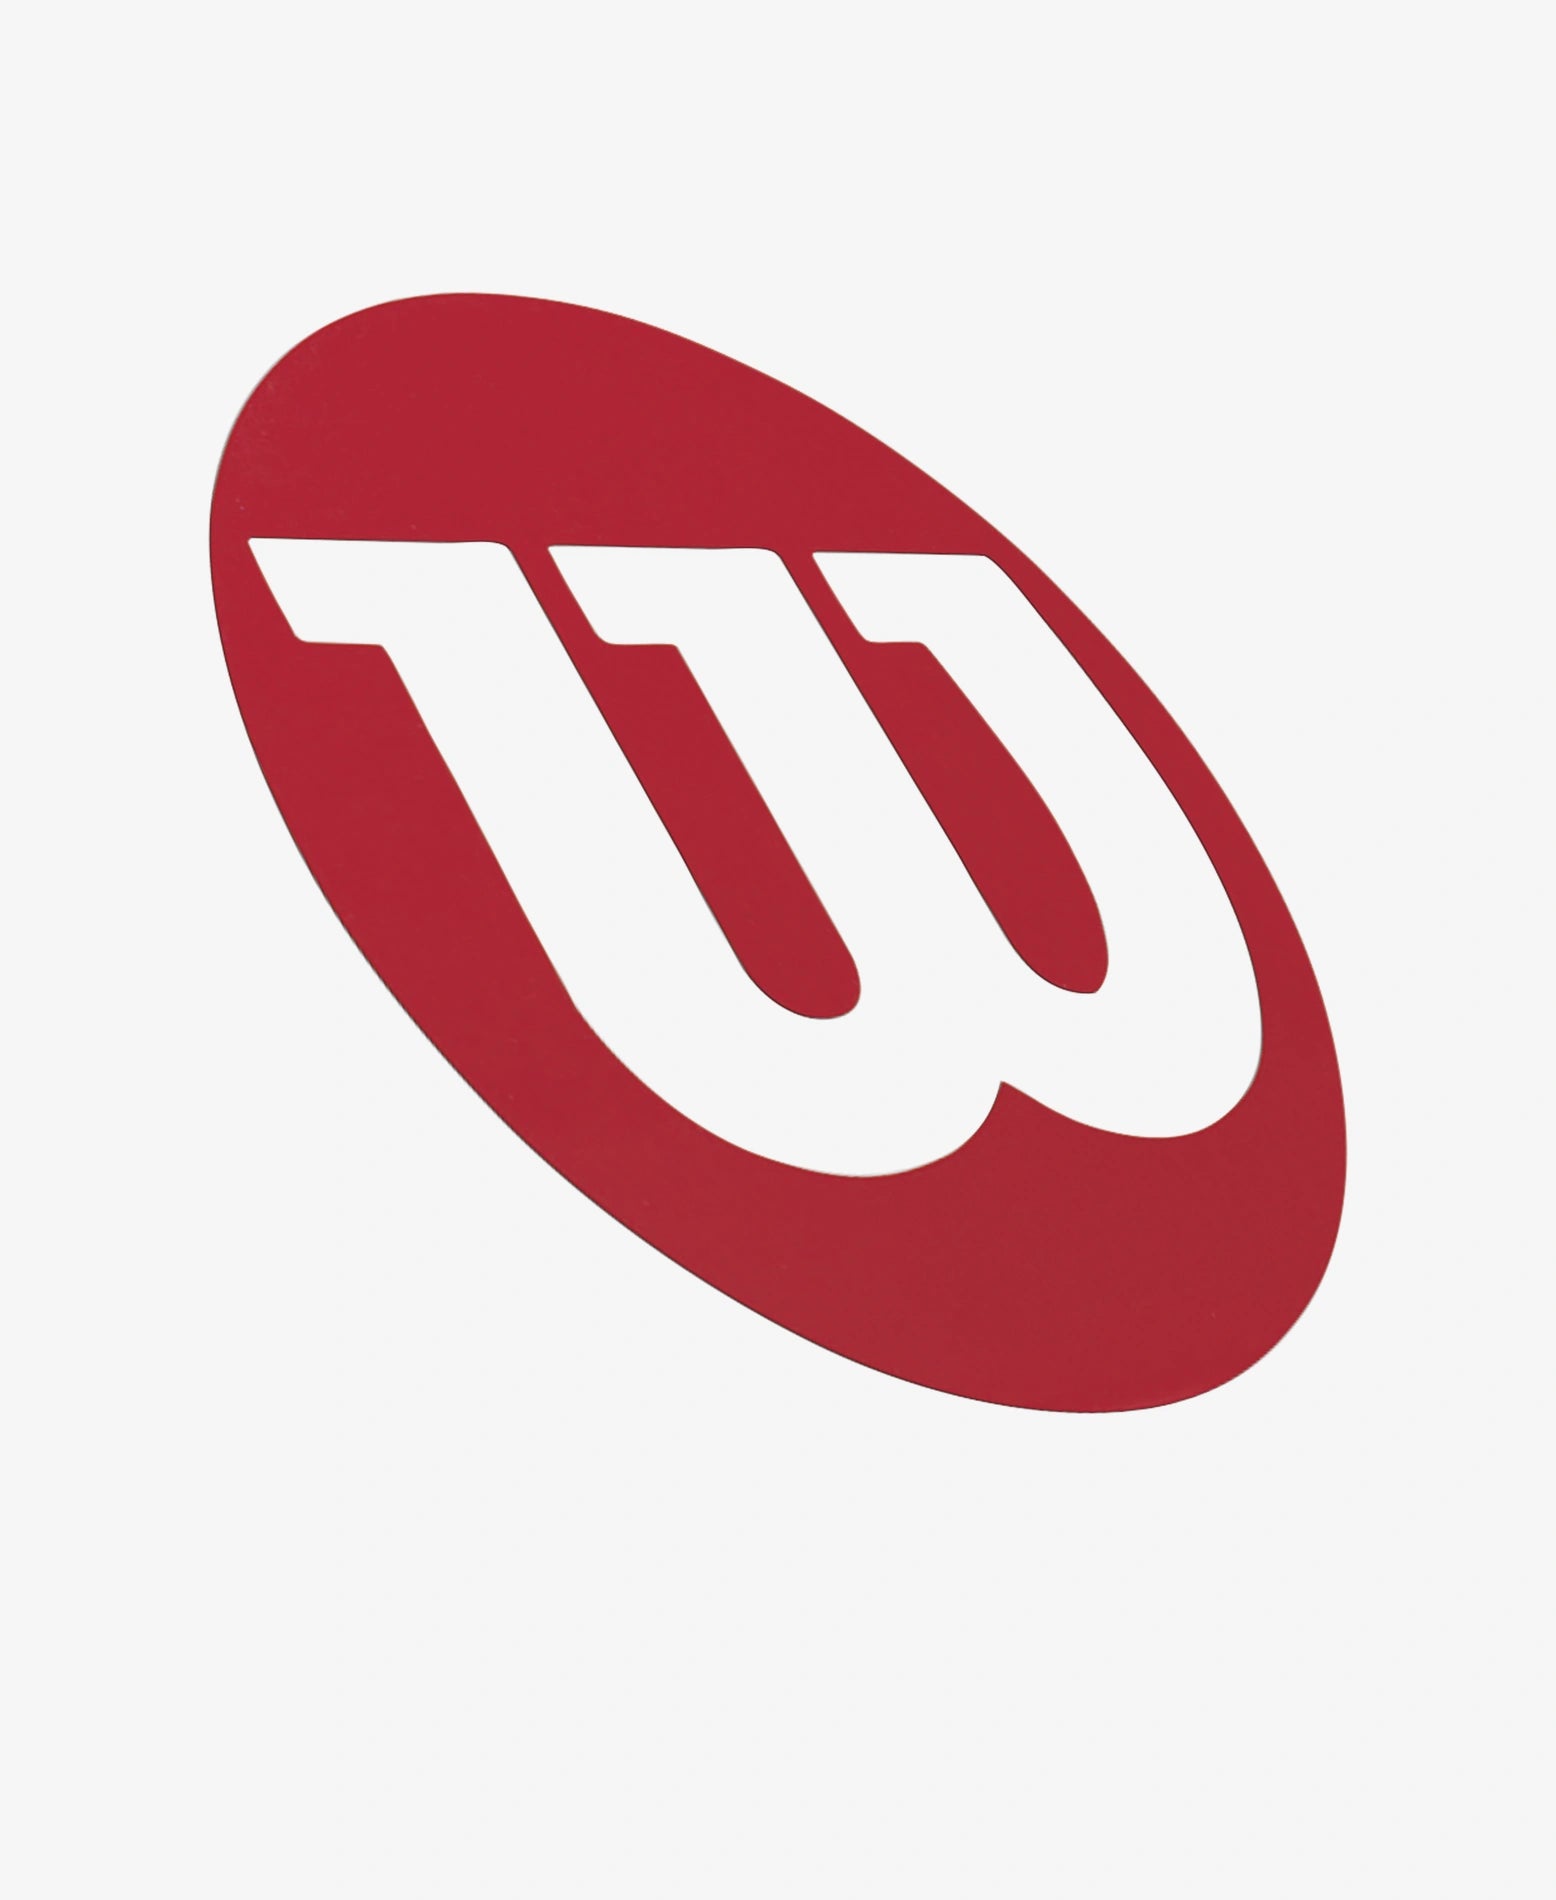 Shop The Wilson "W" Badminton/Squash Stencil available for sale at GSM Sports.  